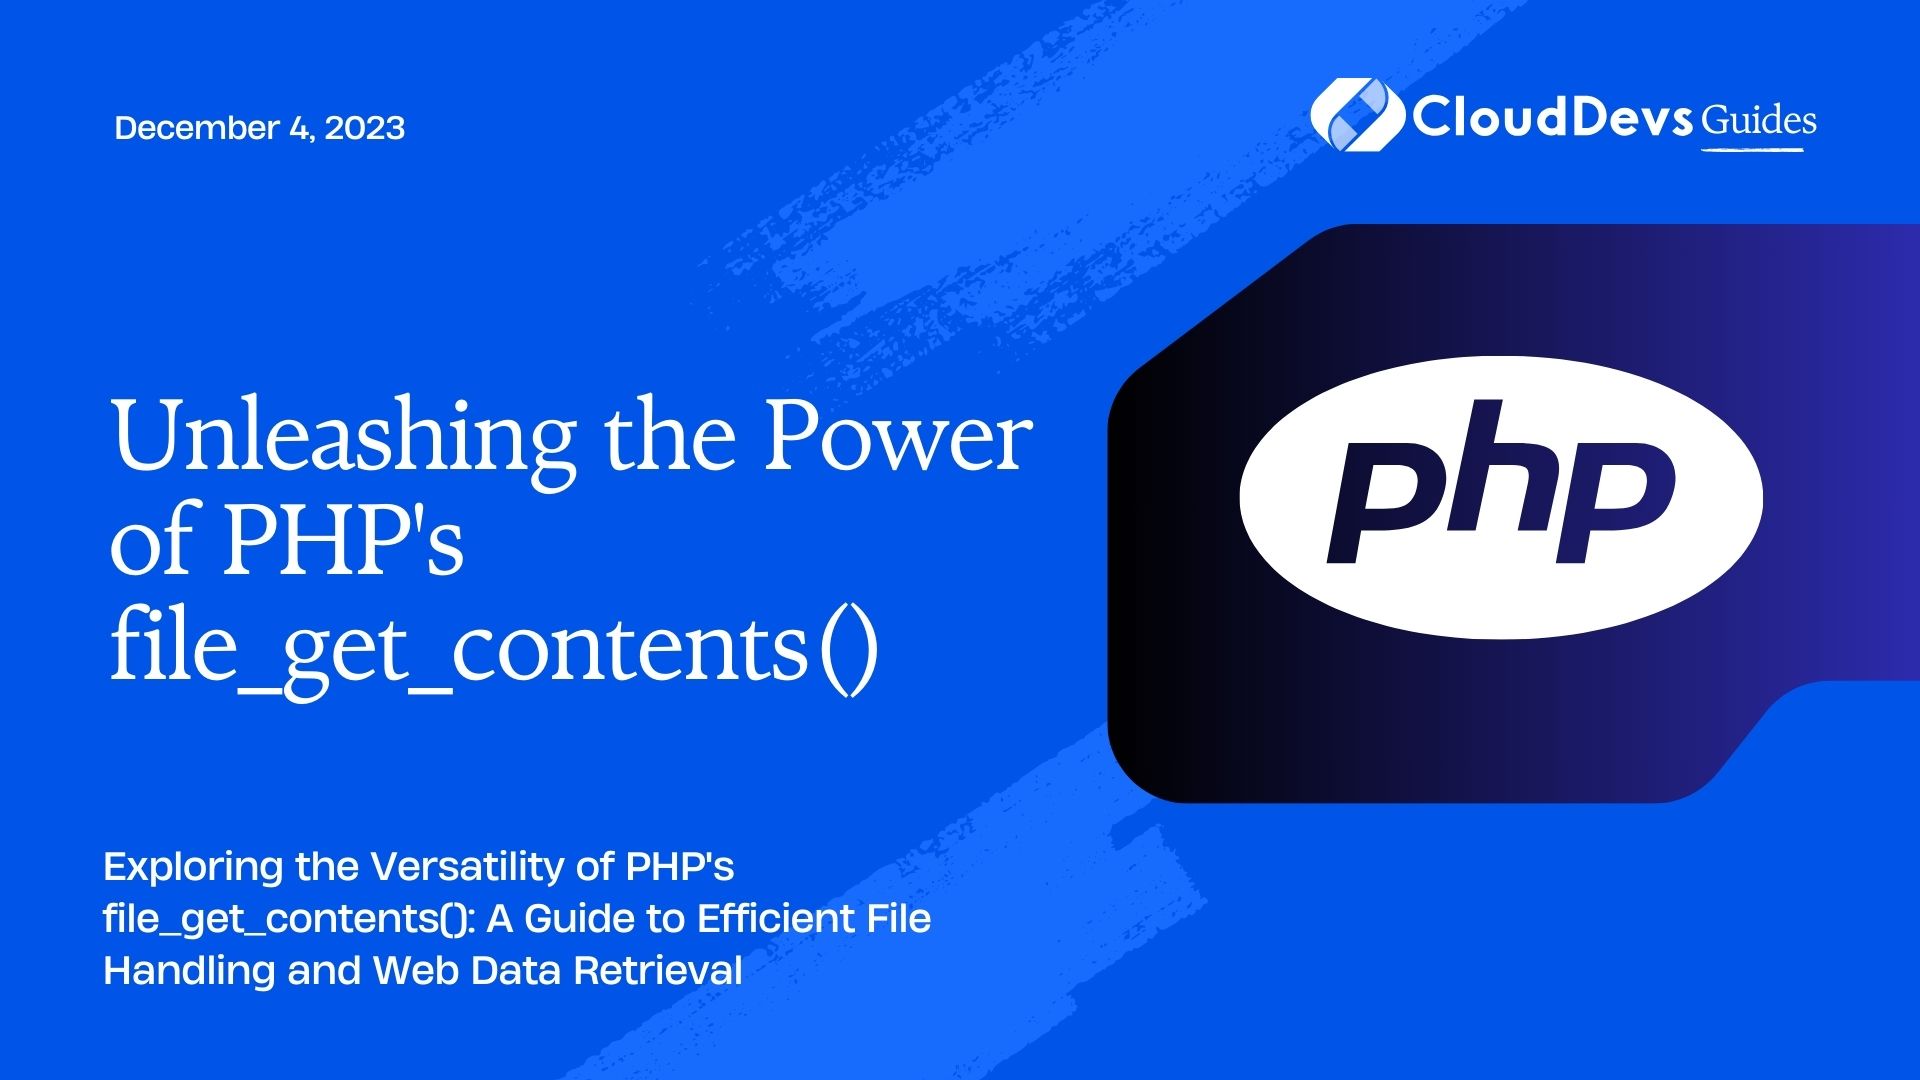 Unleashing the Power of PHP's file_get_contents()